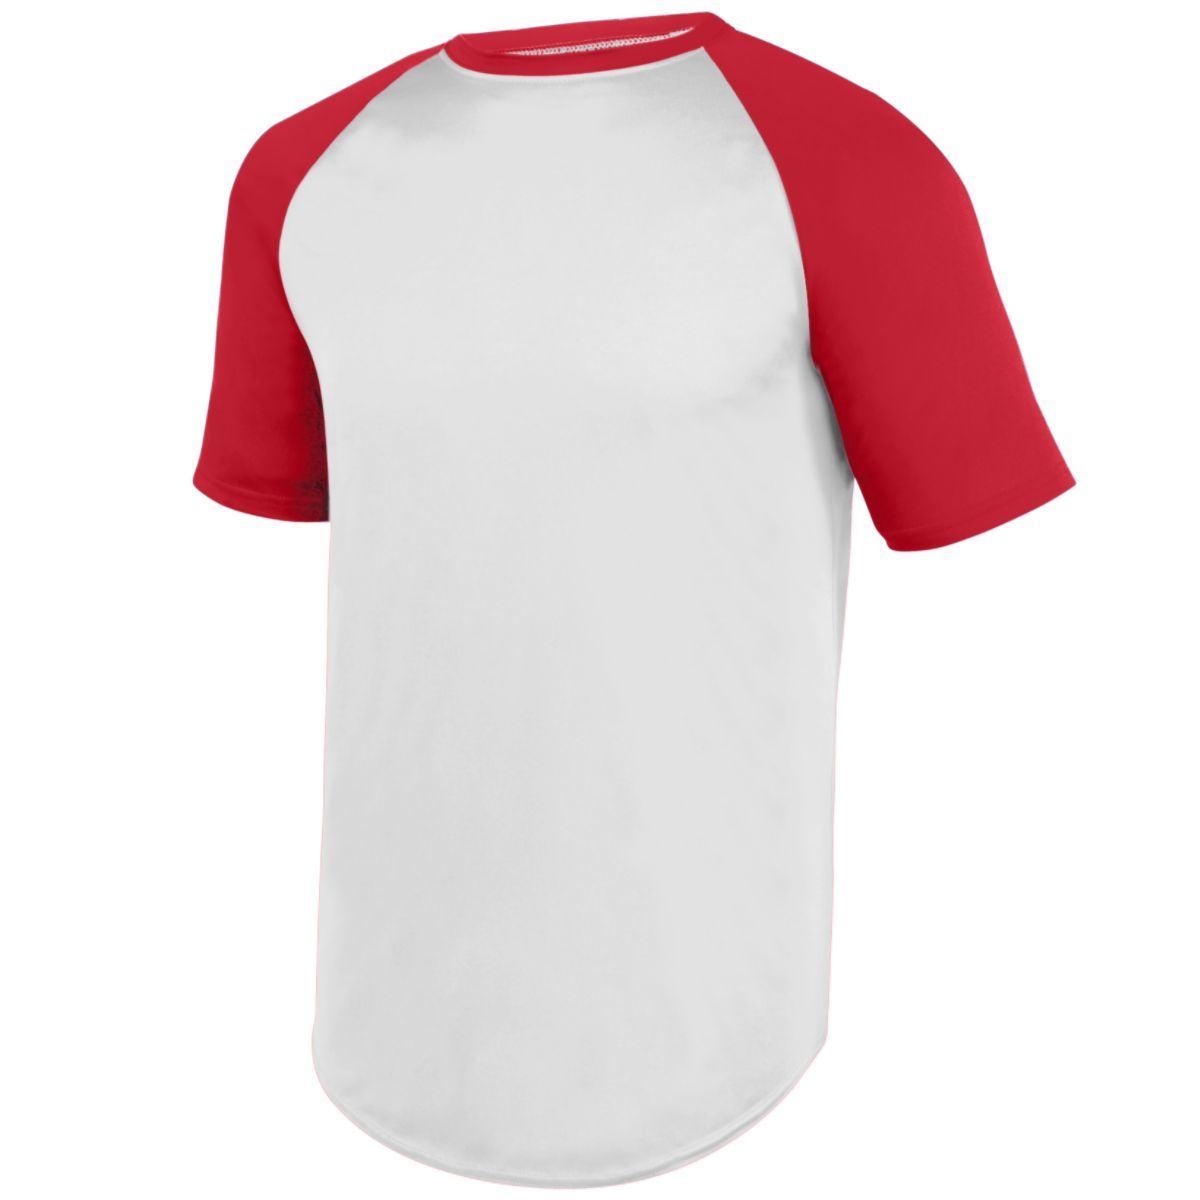 Augusta Sportswear Youth Wicking Short Sleeve Baseball Jersey in White/Red  -Part of the Youth, Youth-Jersey, Augusta-Products, Baseball, Shirts, All-Sports, All-Sports-1 product lines at KanaleyCreations.com